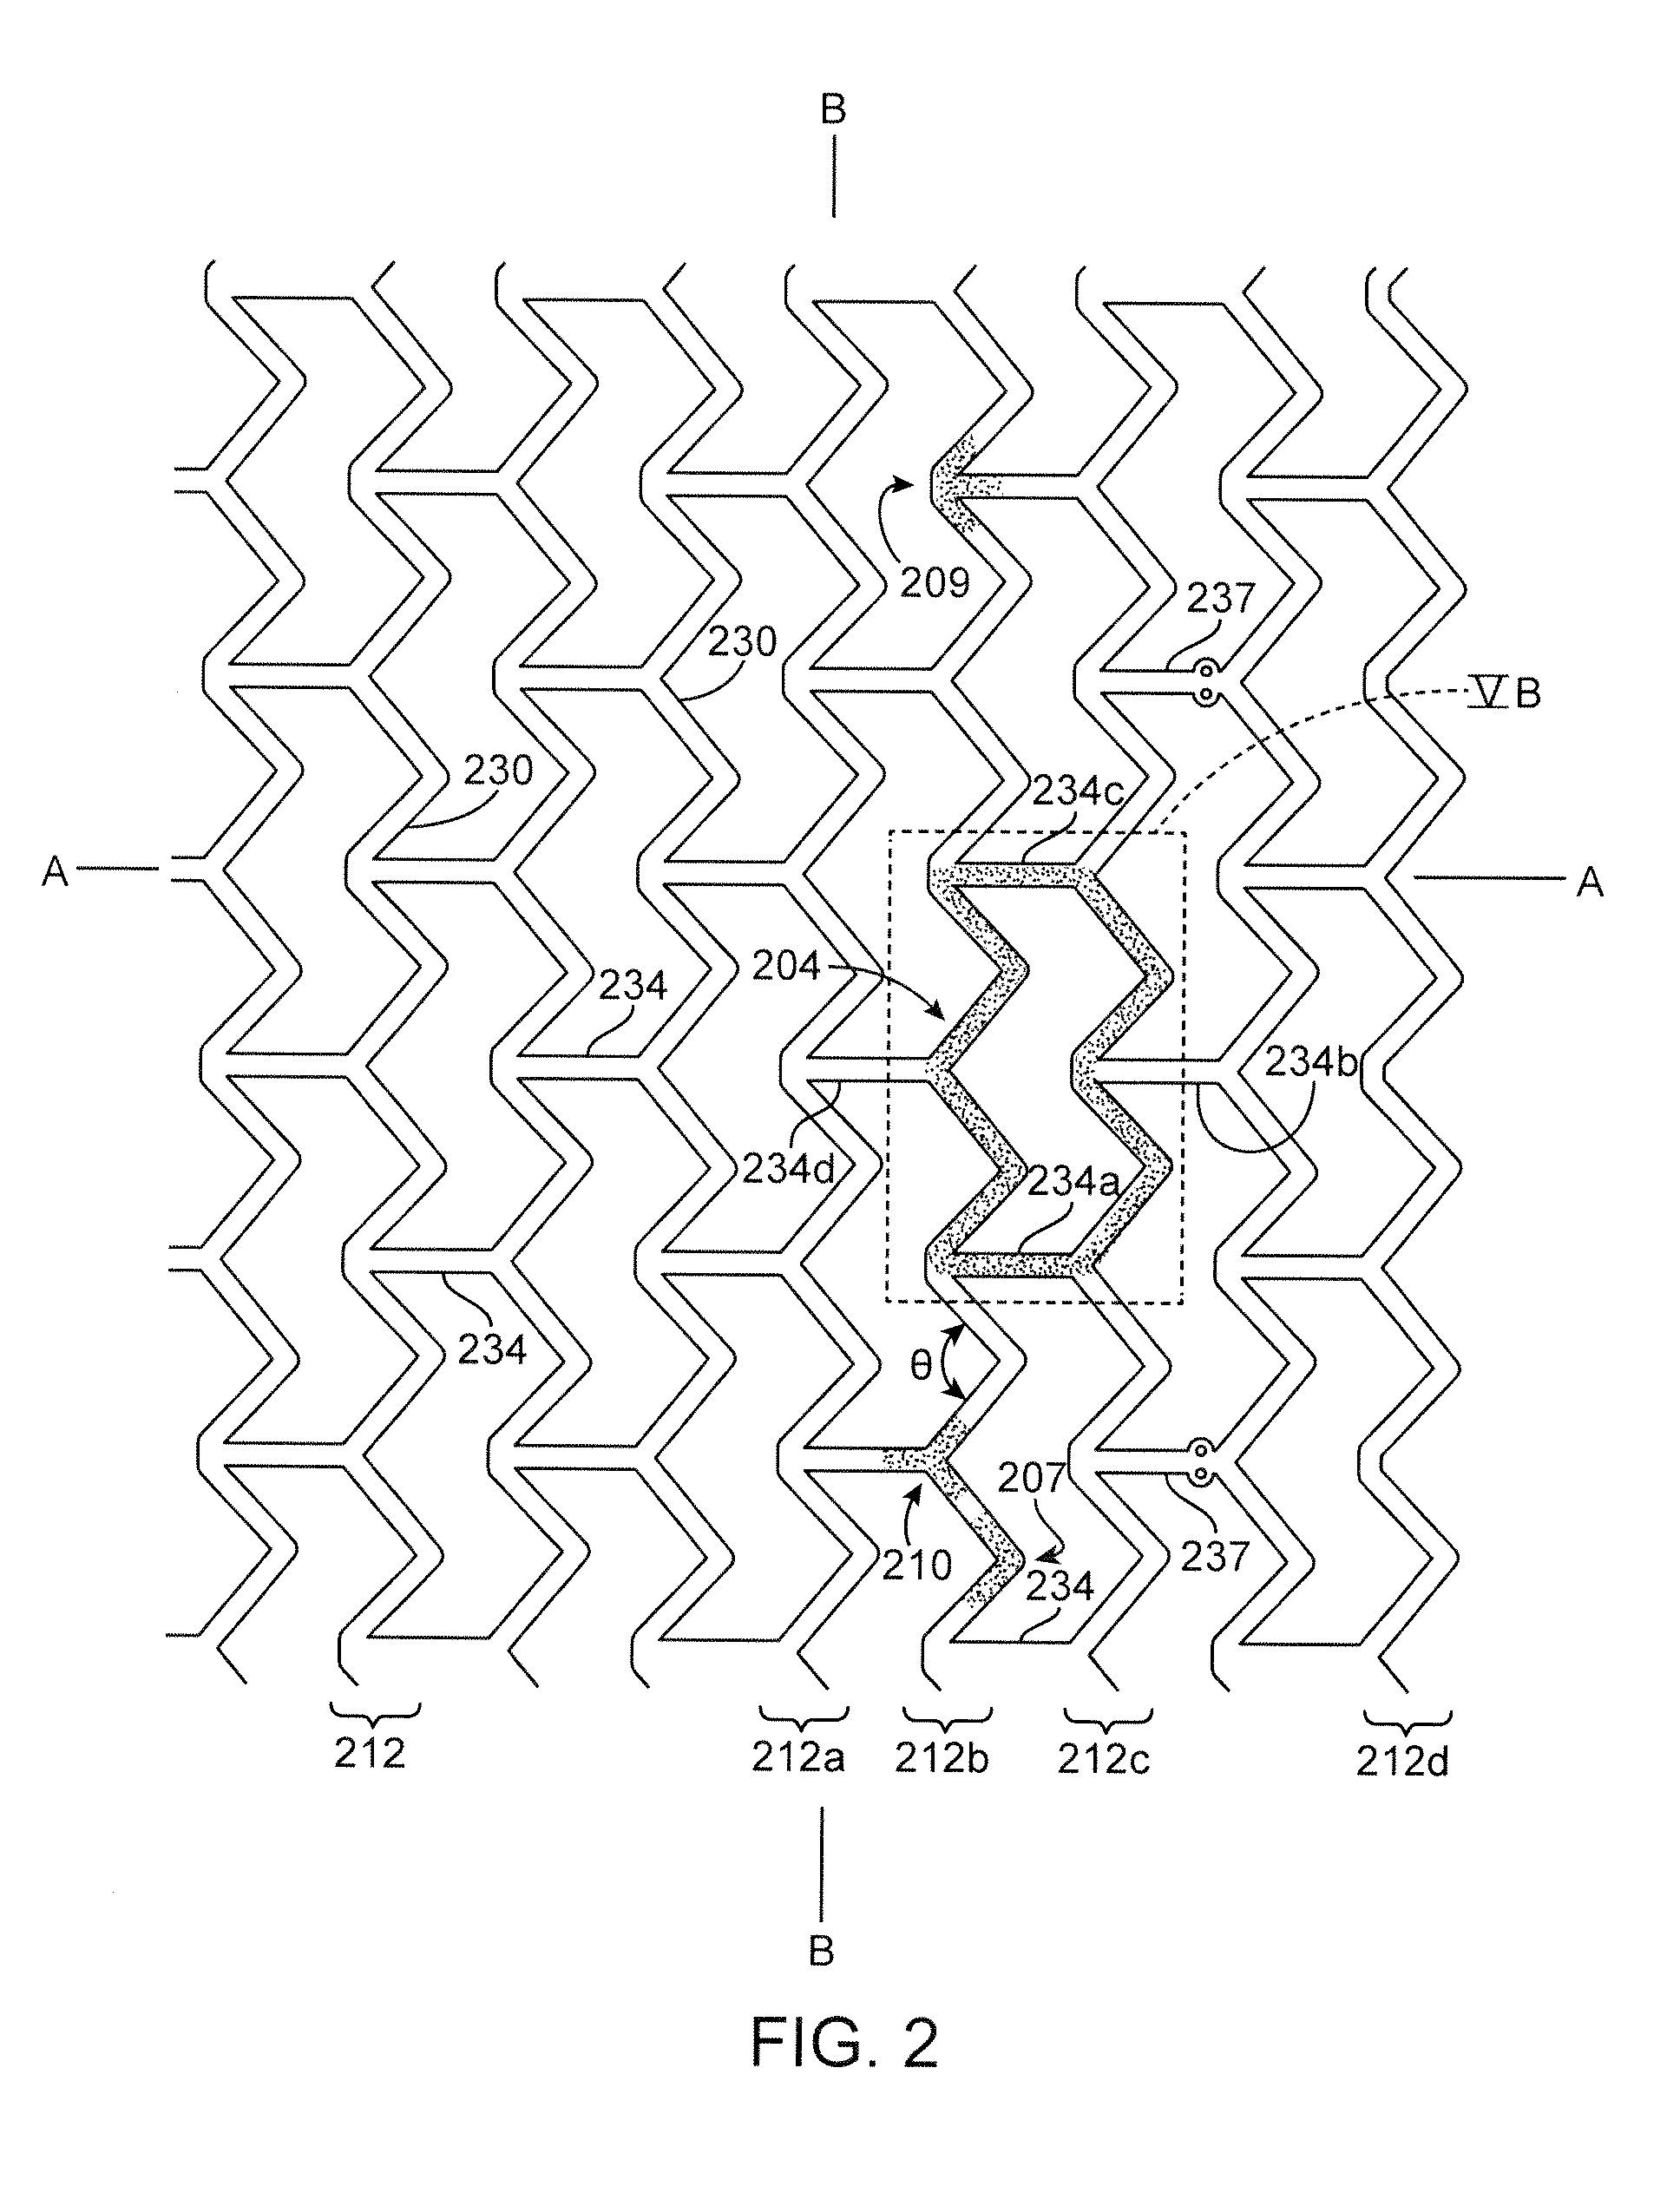 Crush Recoverable Polymer Scaffolds Having a Low Crossing Profile